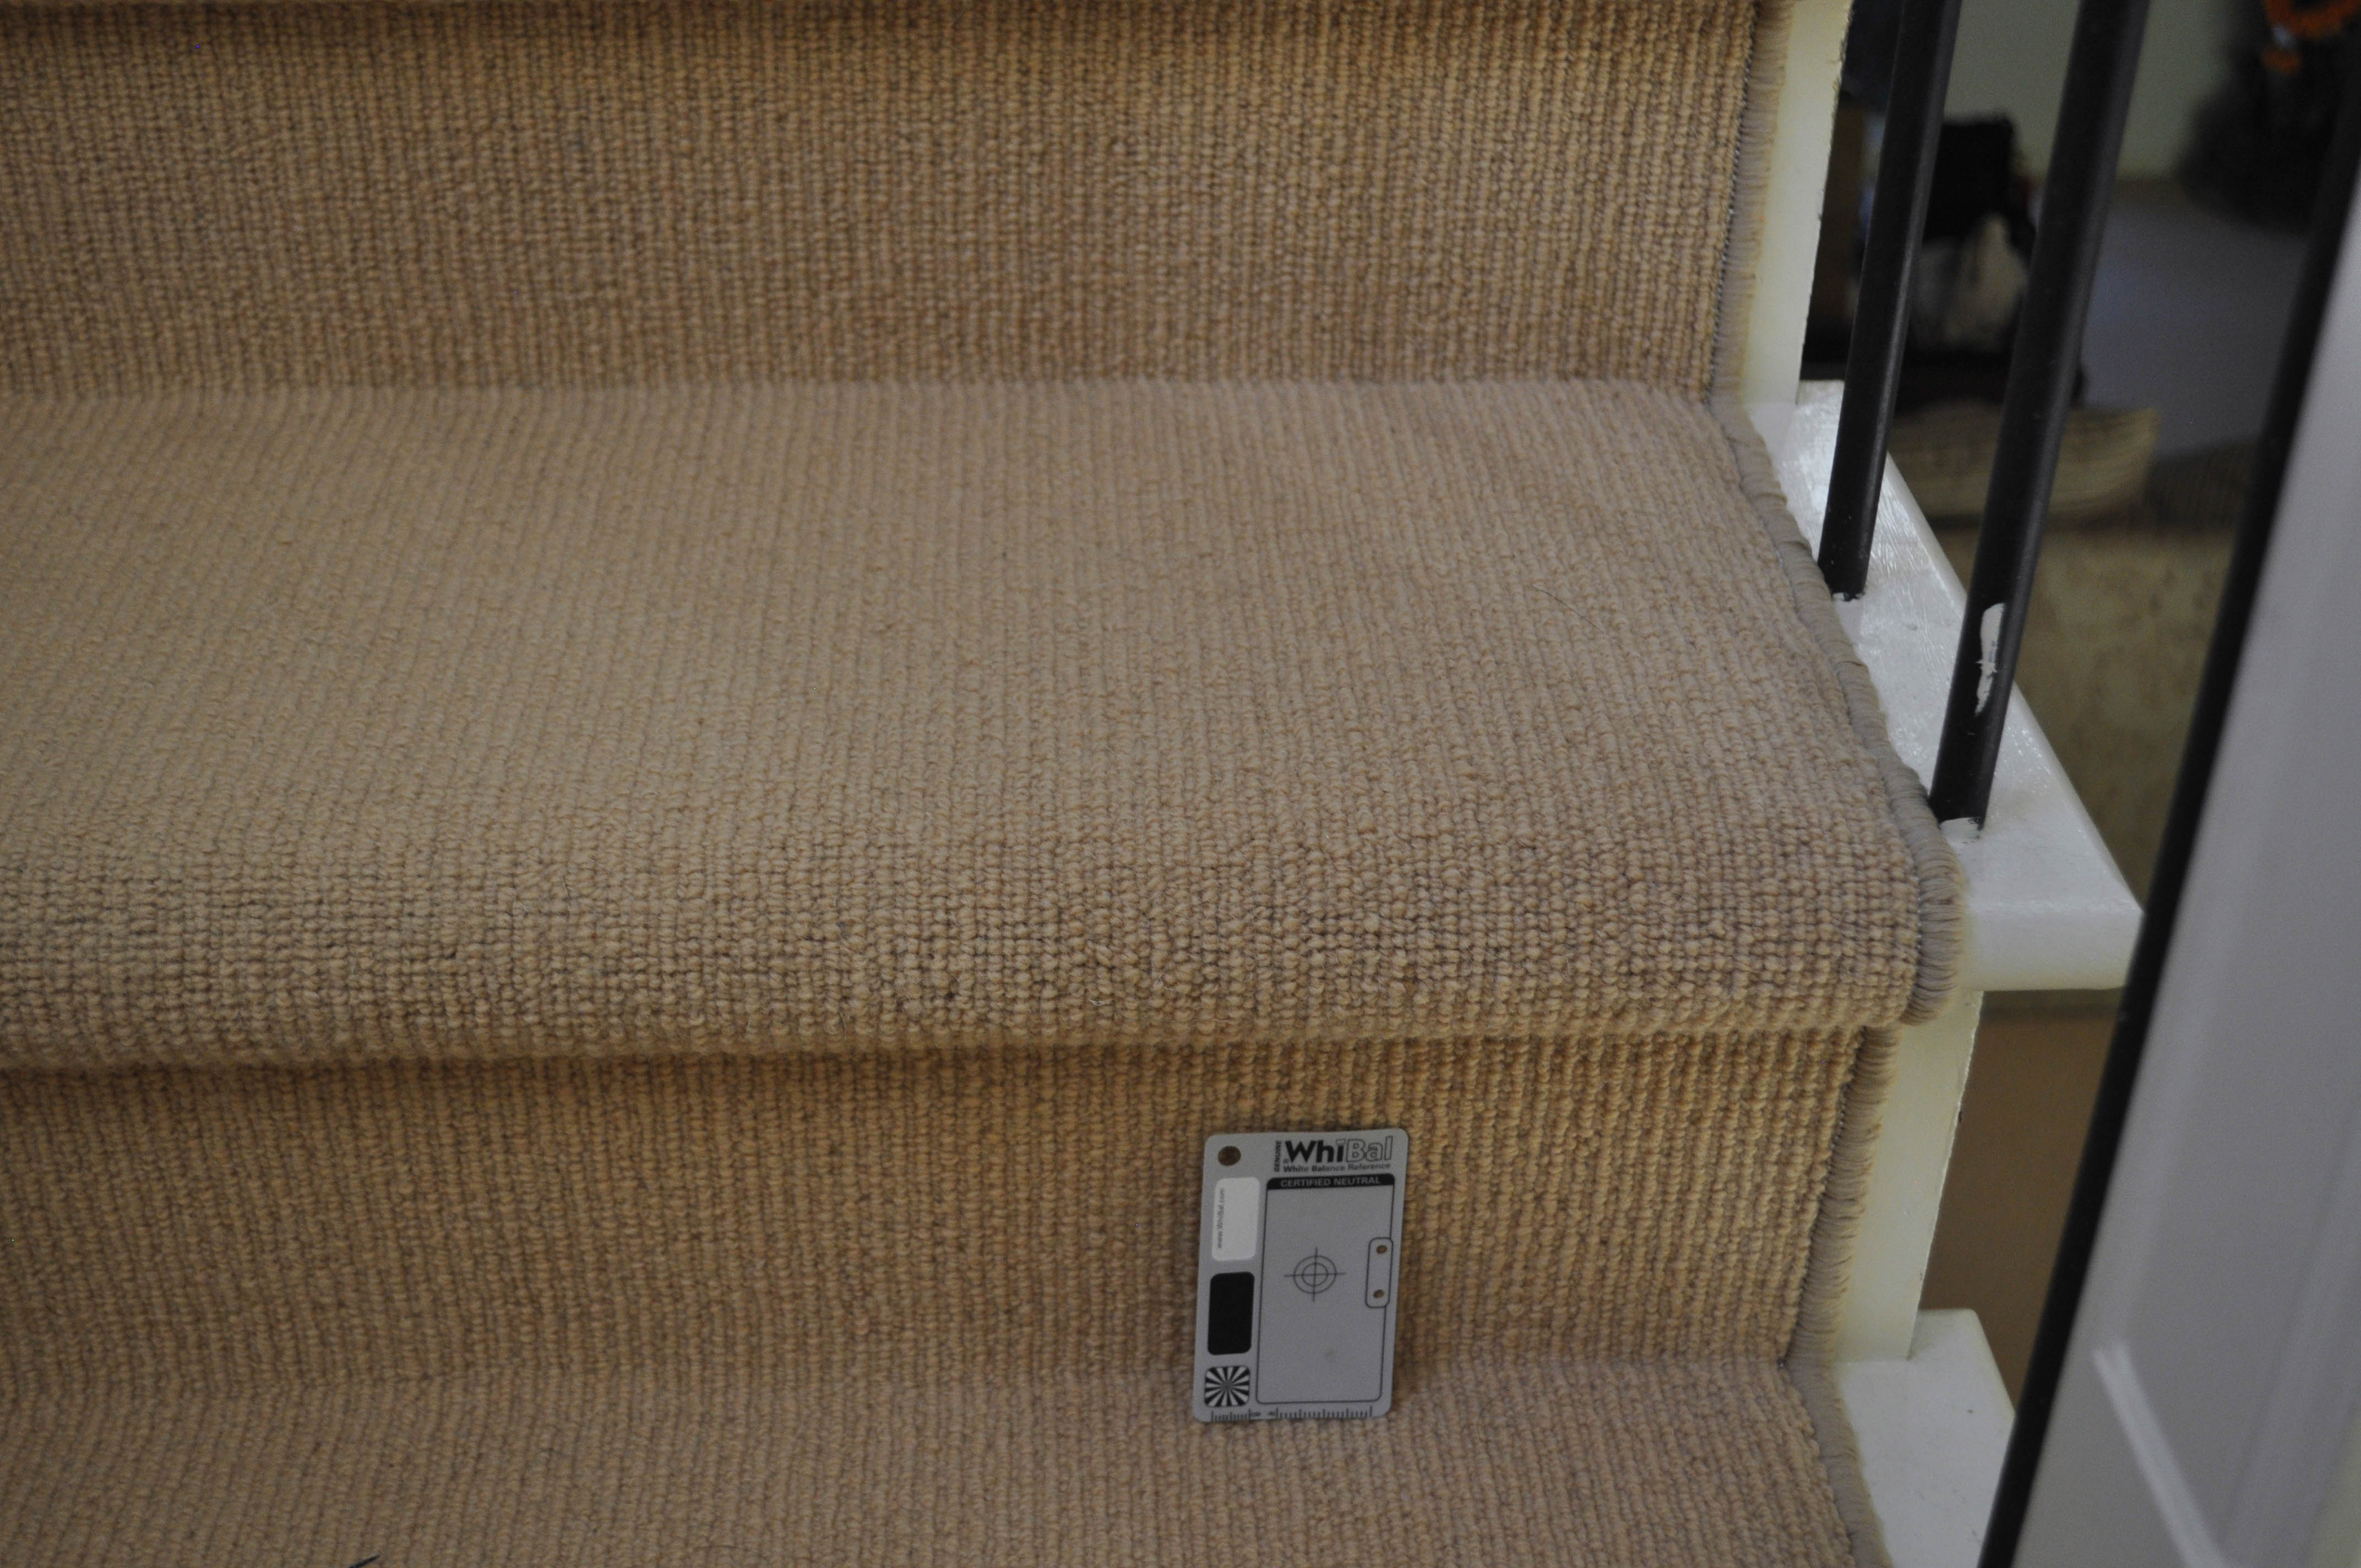 showing a staircase with it's floor carpeted, the carpet being of an orange color, sisal tram trek pile, wool yarn carpet on sale at Concord Floors